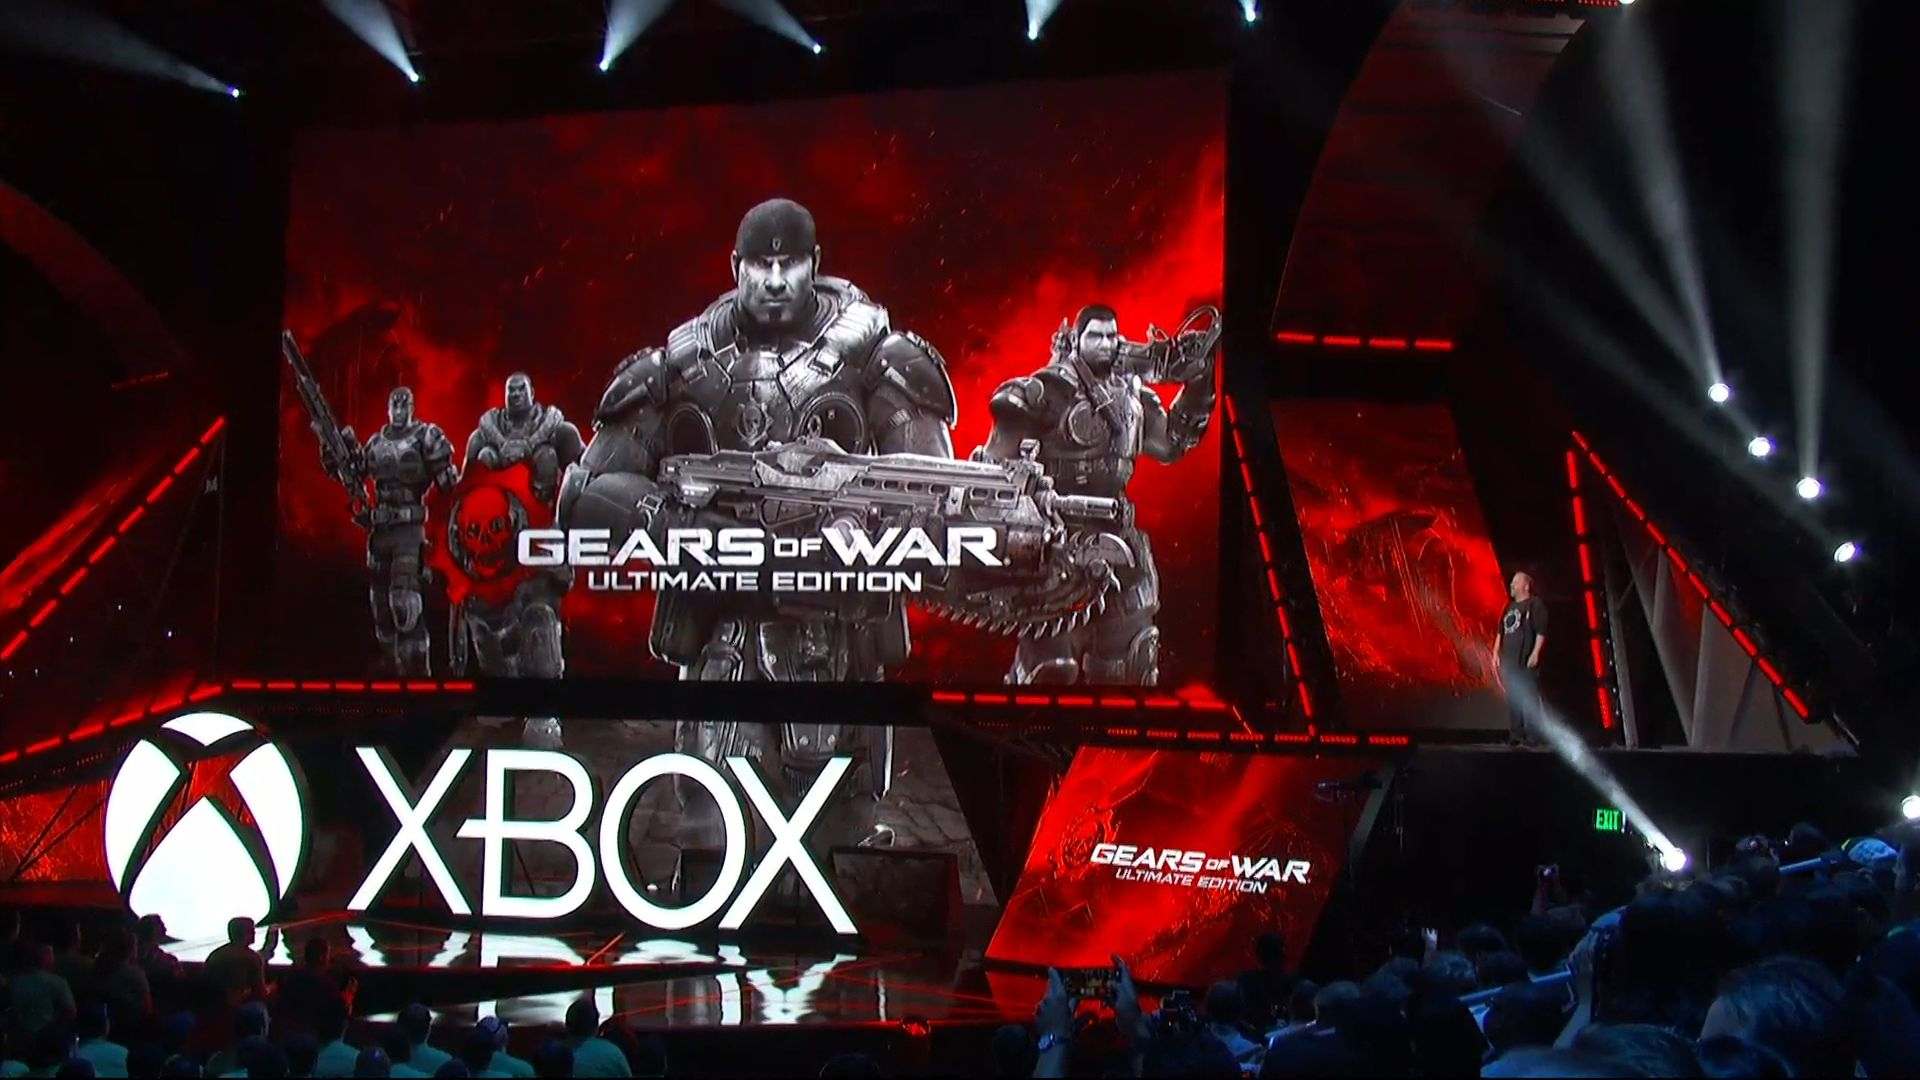 Gears of War Ultimate Edition - Xbox One - E3 2015